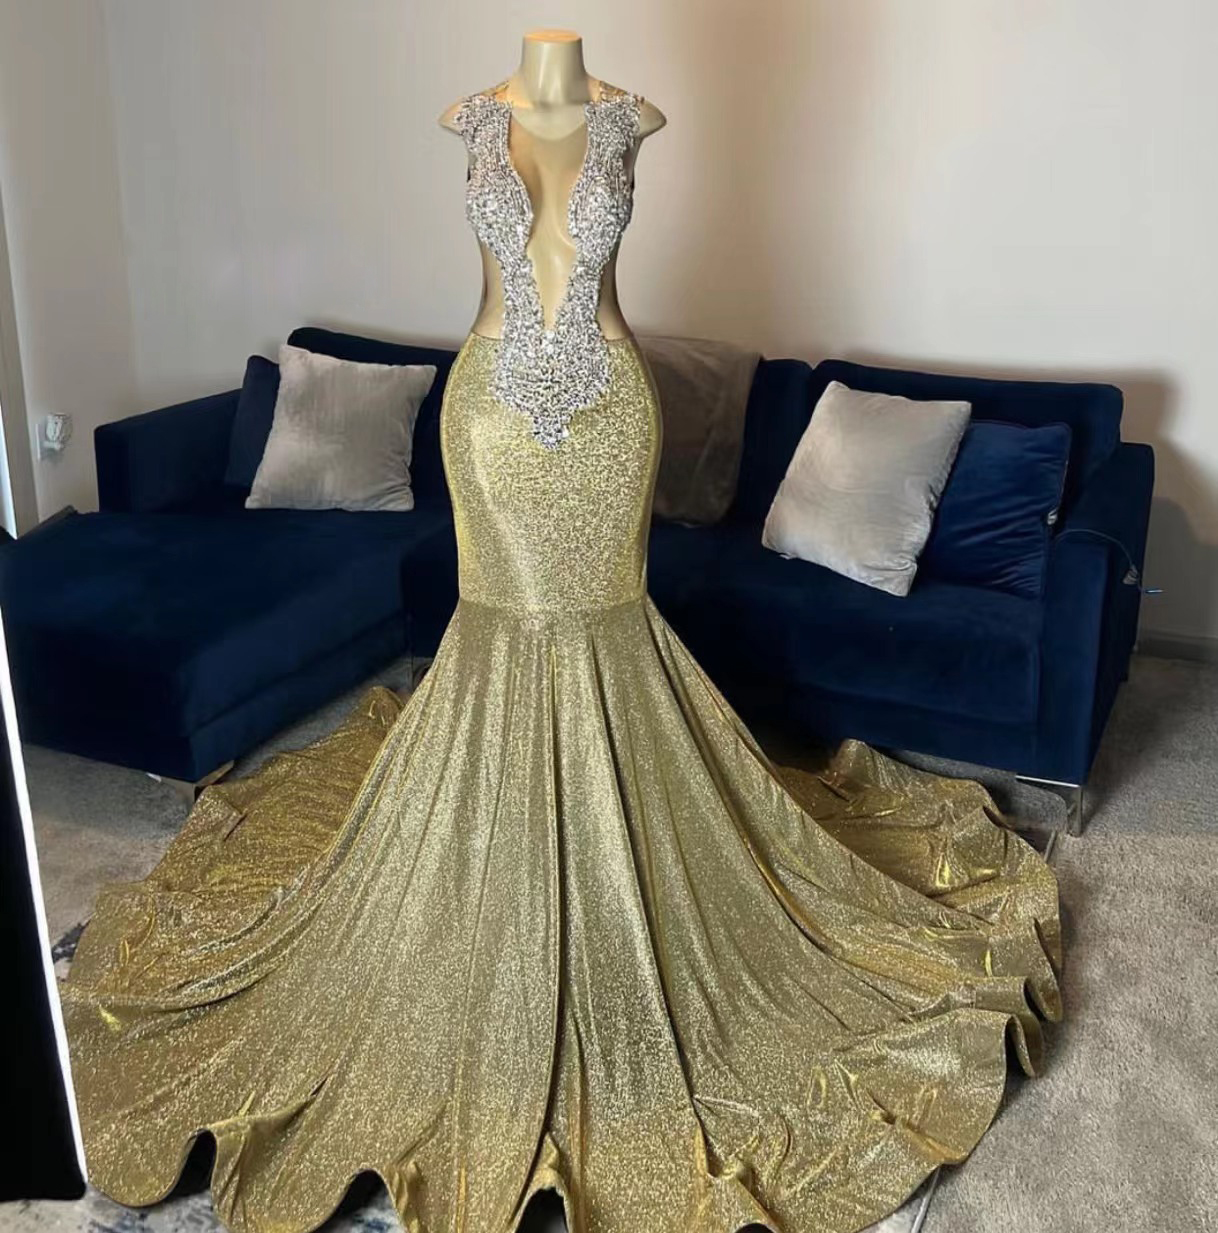 Gold Fashion Prom Dresses For Black Girls O Neck Mermaid Sparkly Crystals Luxury Formal Occasion Dresses Mermaid Sleeveless Design Evening Wear